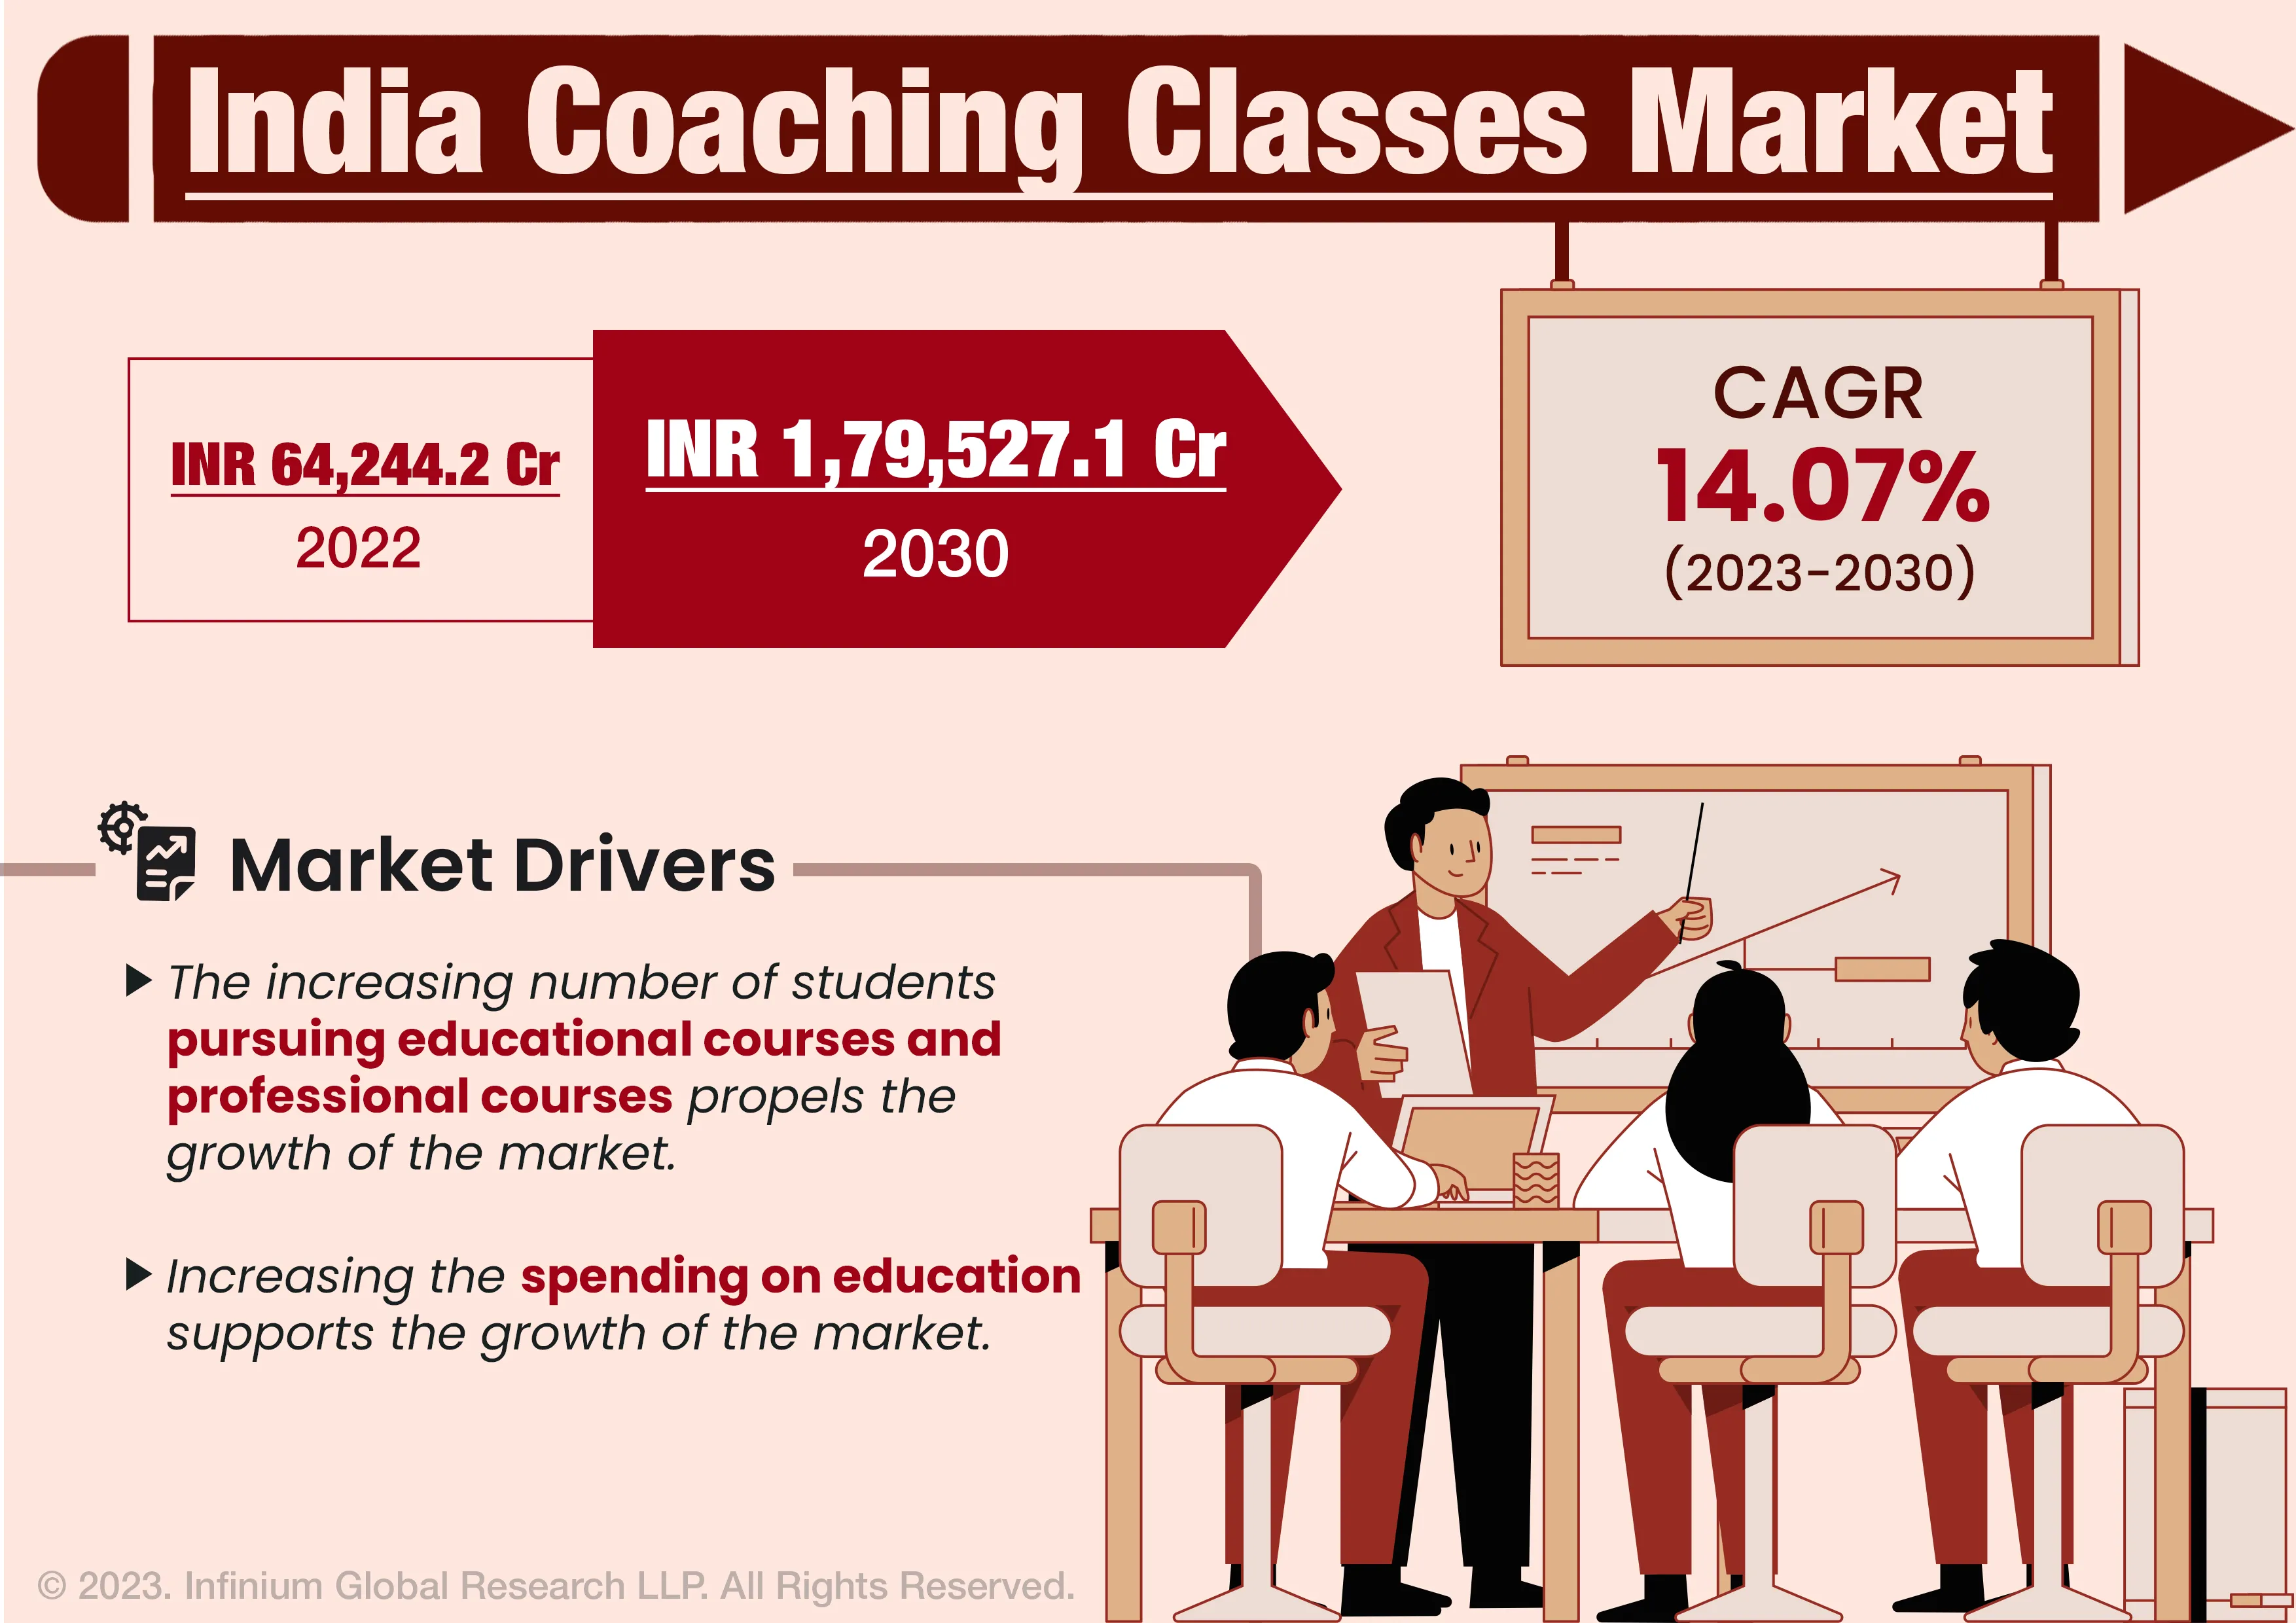 India Coaching Classes Market was Valued at INR 64,244.2 Crore in 2022 and is Expected to Reach INR 1,79,527.1 Crore by 2030 and Grow at a CAGR of 14.07% Over the Forecast Period.